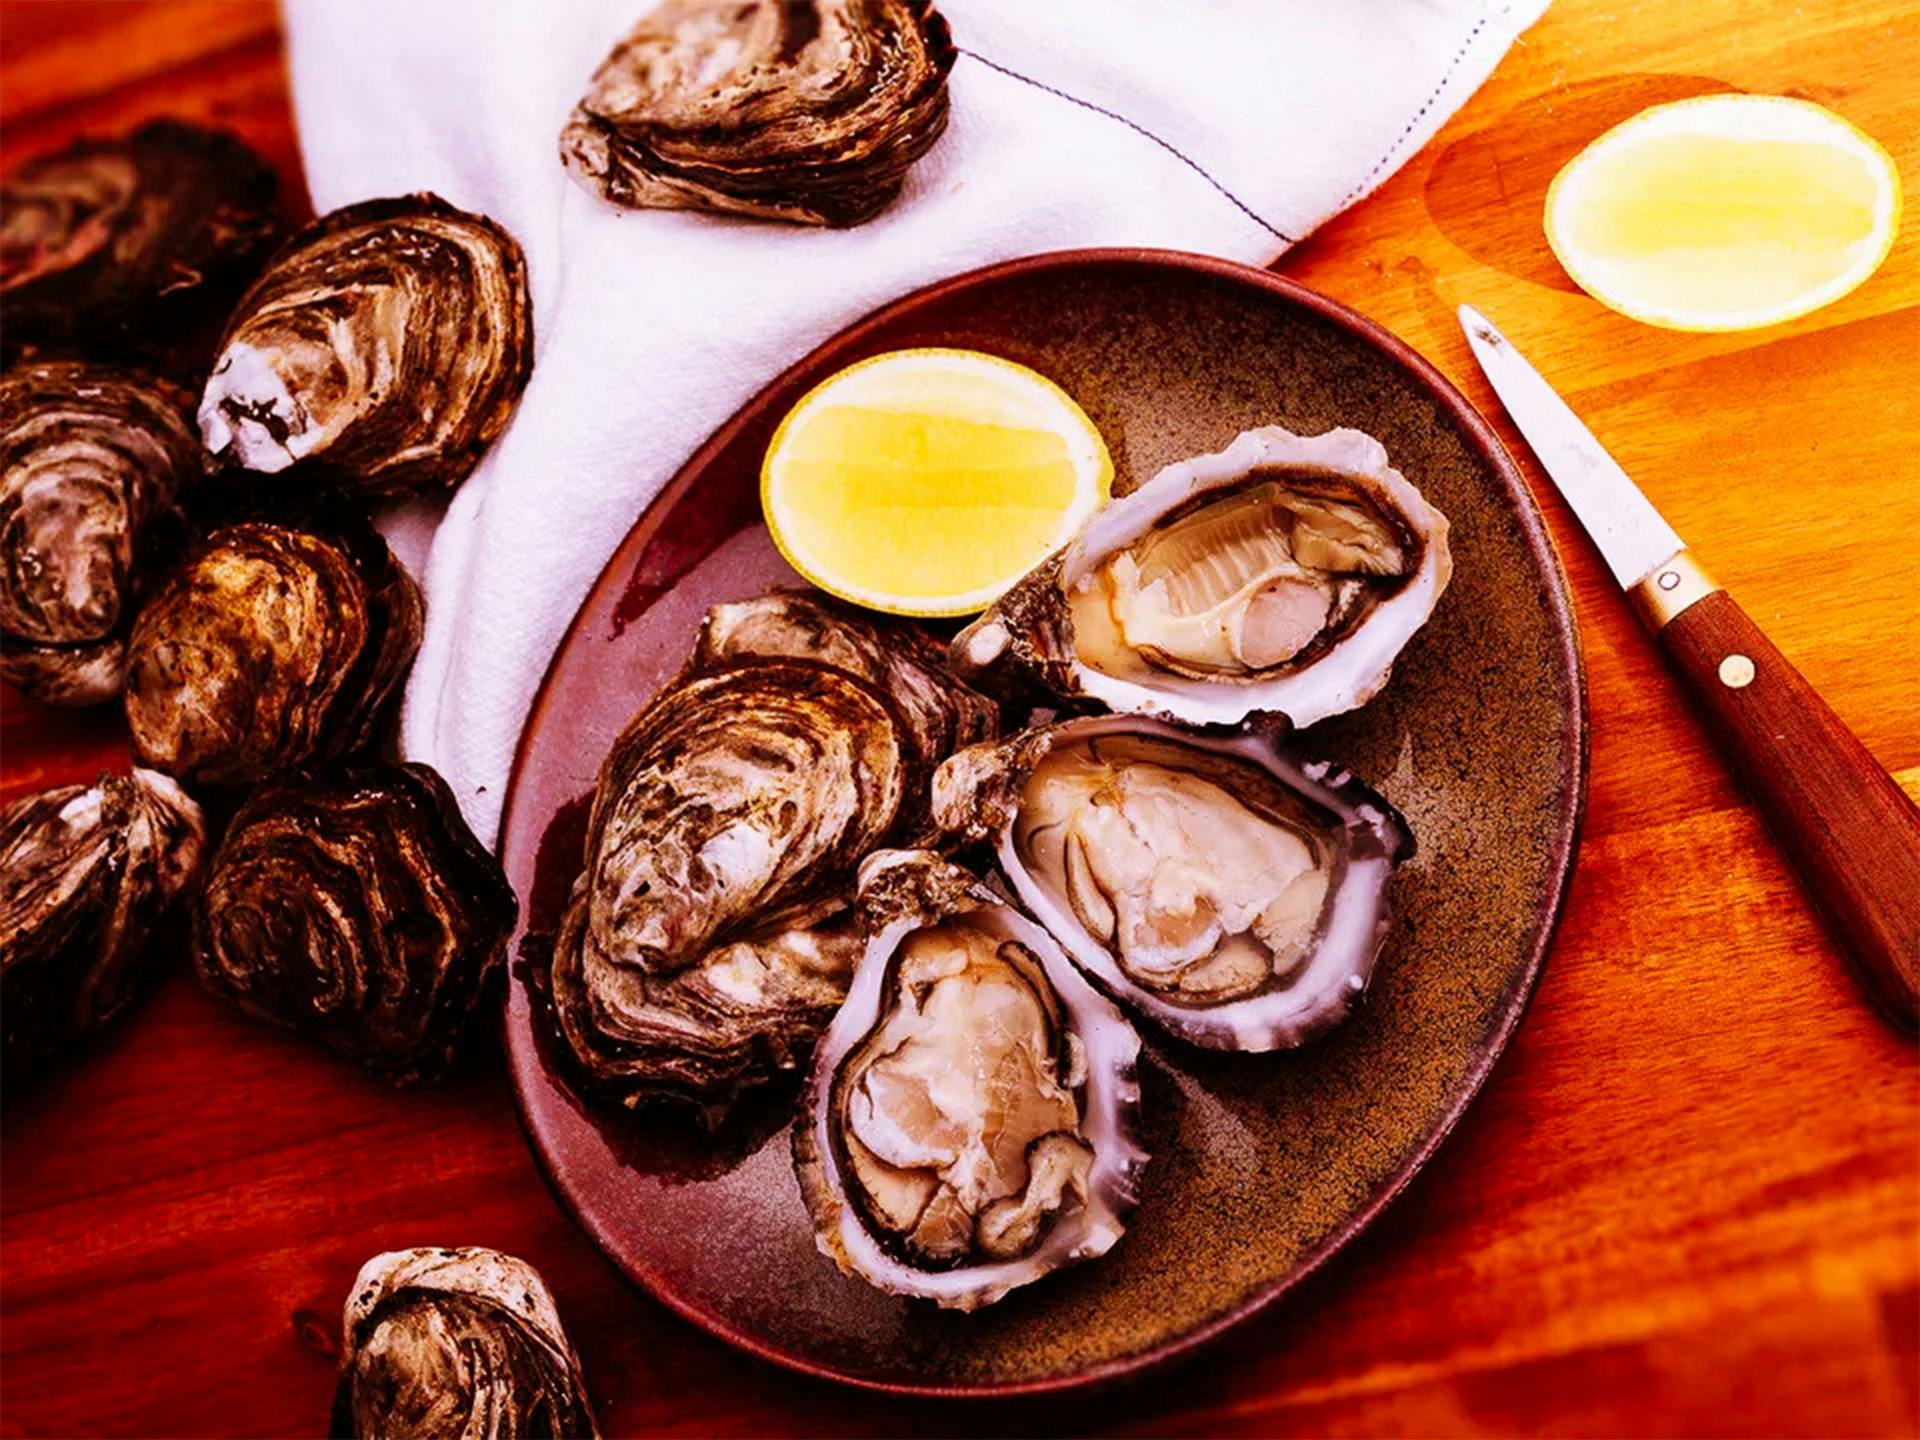 Oysters on a plate with a slice of lemon